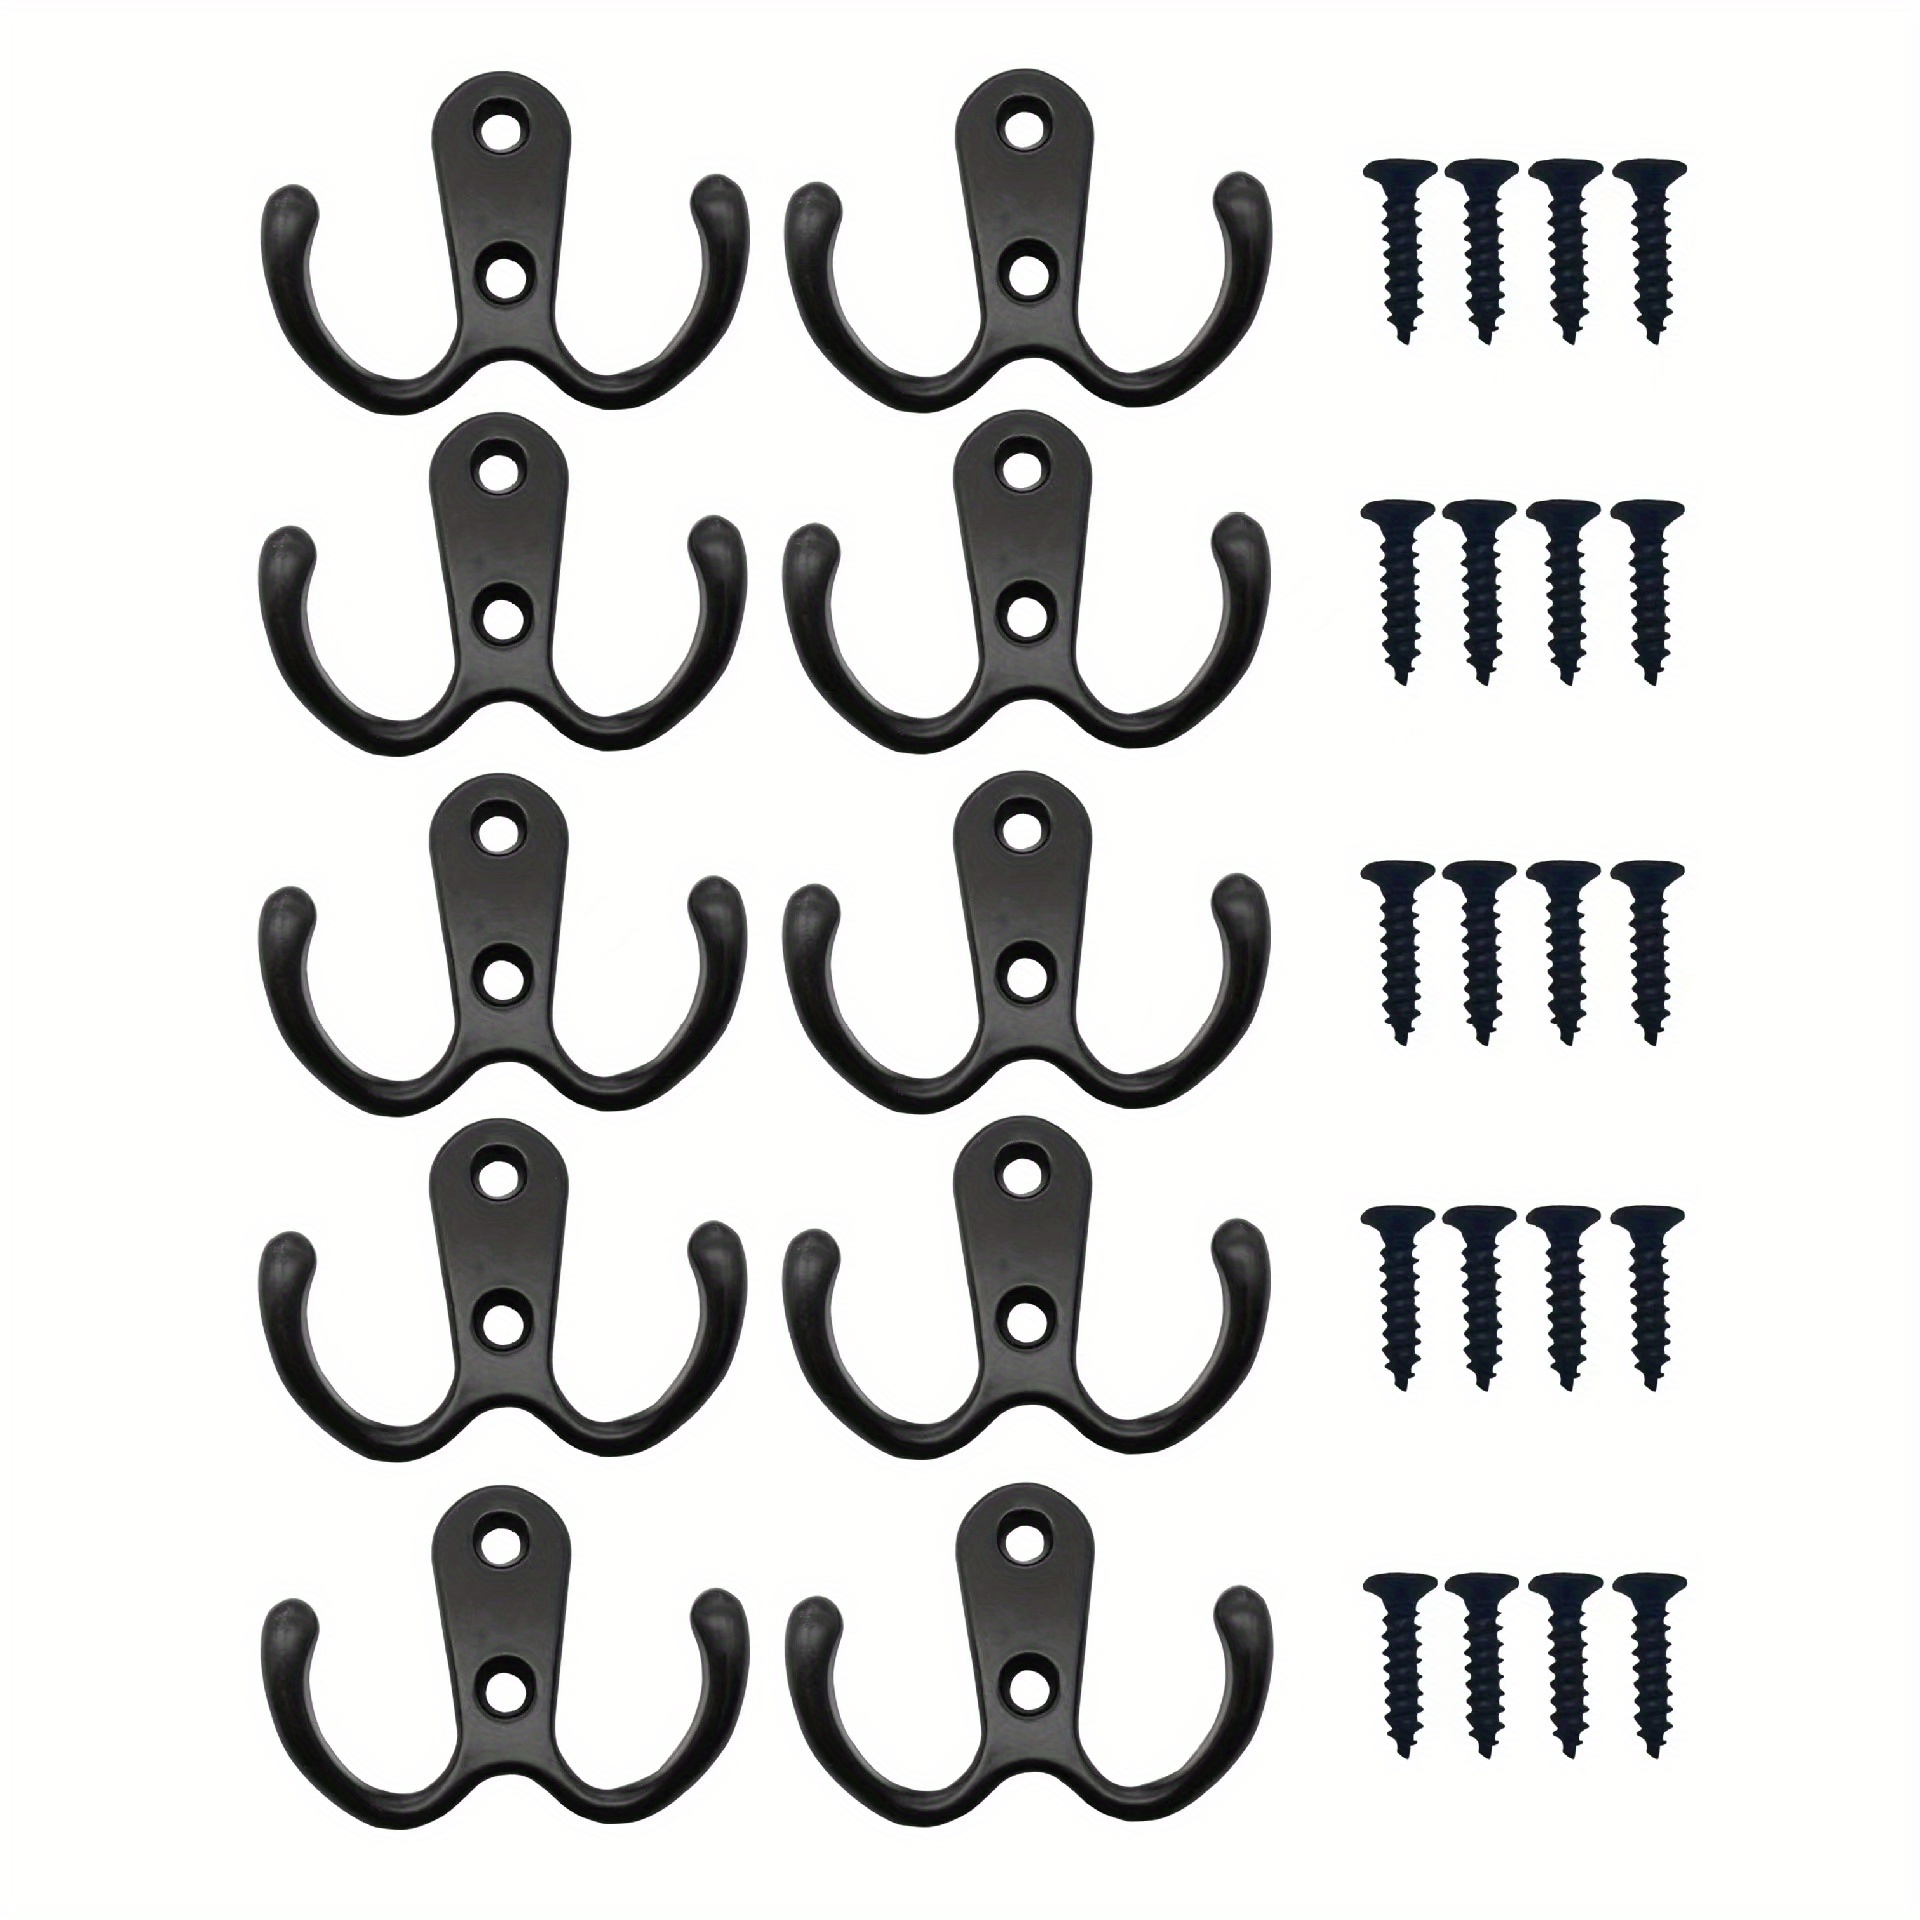 8 Pcs Black Coat Hooks for Wall, Heavy Duty Hooks for Hanging Coats No Rust  Hooks Wall Mounted with Screws for Key, Towel, Bags, Cup, Hat Indoor and